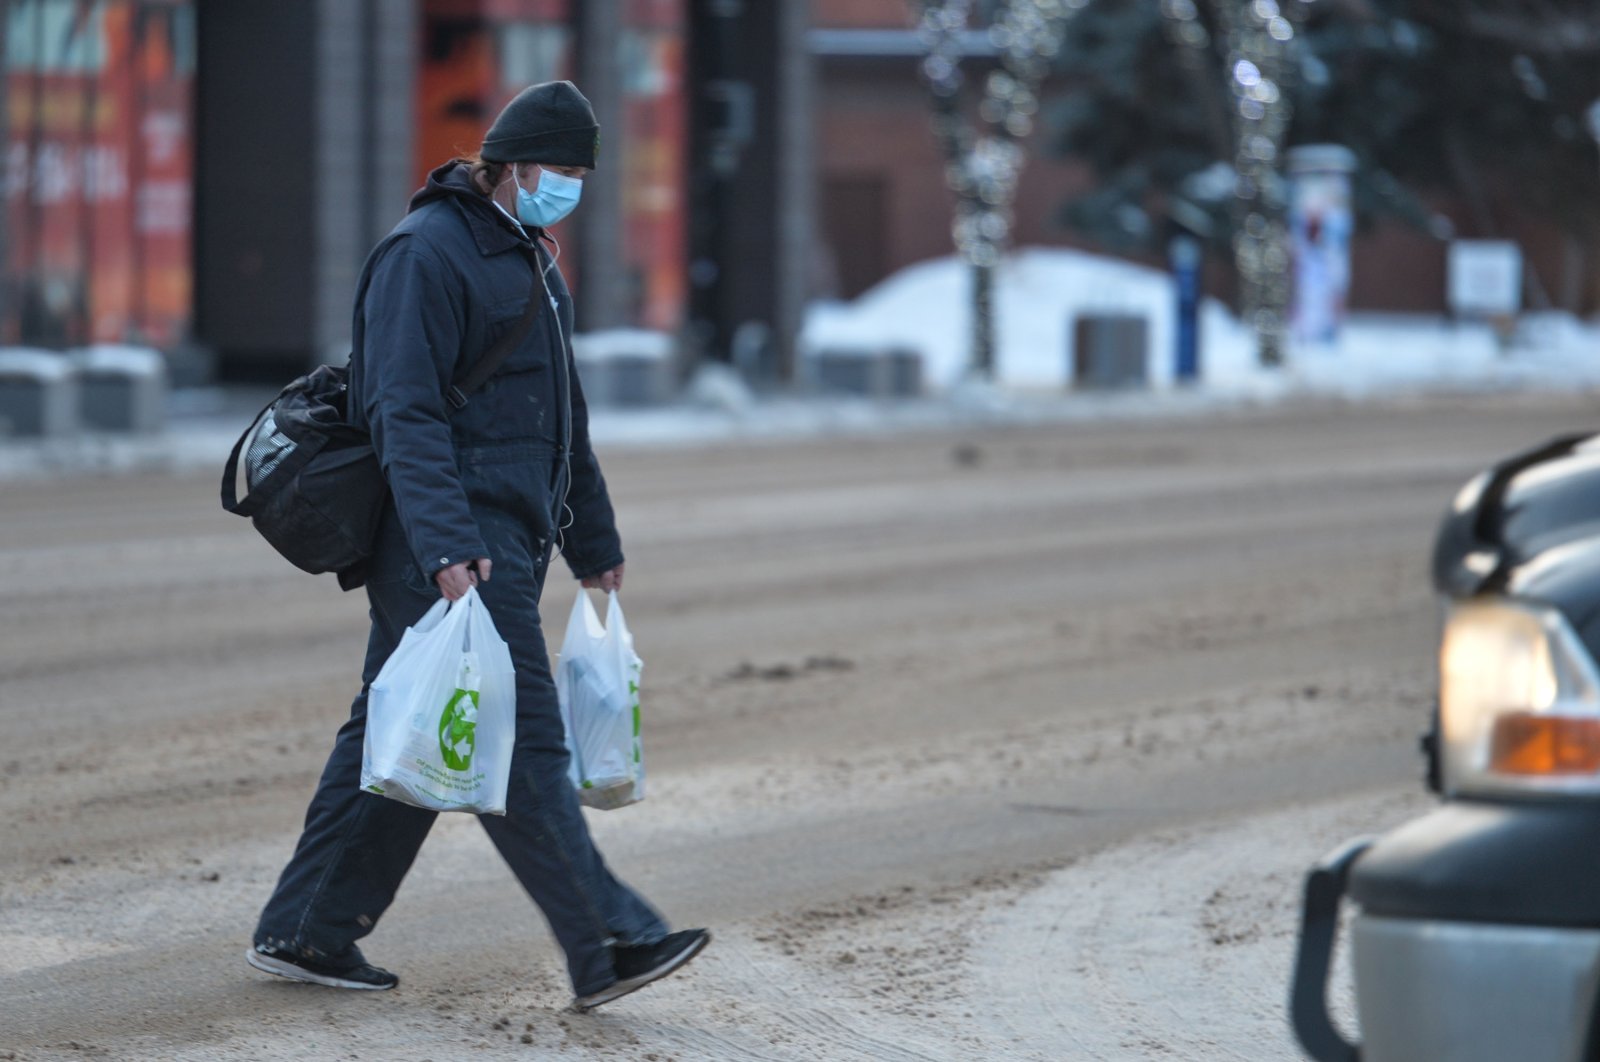 A man wearing a face mask and carrying shopping bags crosses the street in the center of Edmonton, Alberta, Canada, Jan. 14, 2021. (Reuters Photo)